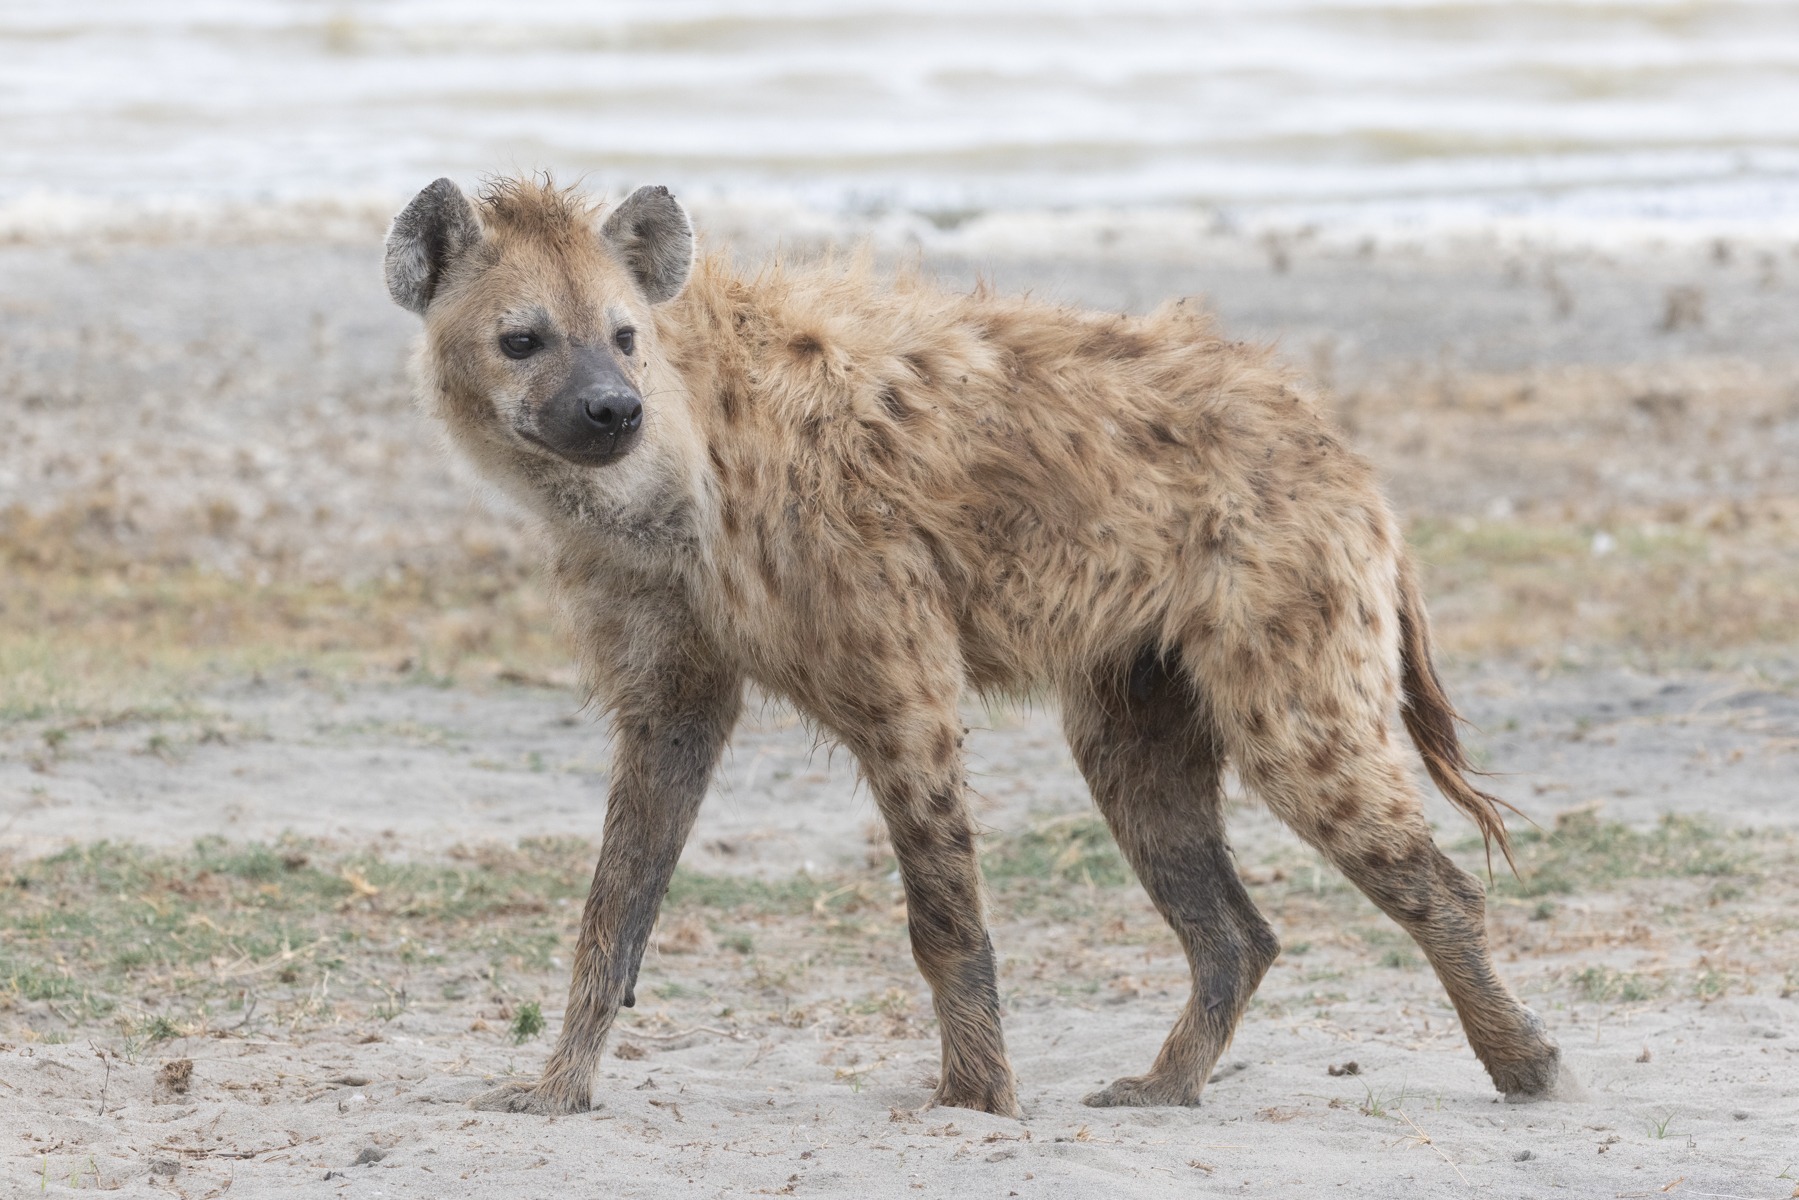 A lone Spotted Hyena prowls the shoreline of the lake in Ngorongoro. He was most likely searching for birds nests with chicks or eggs